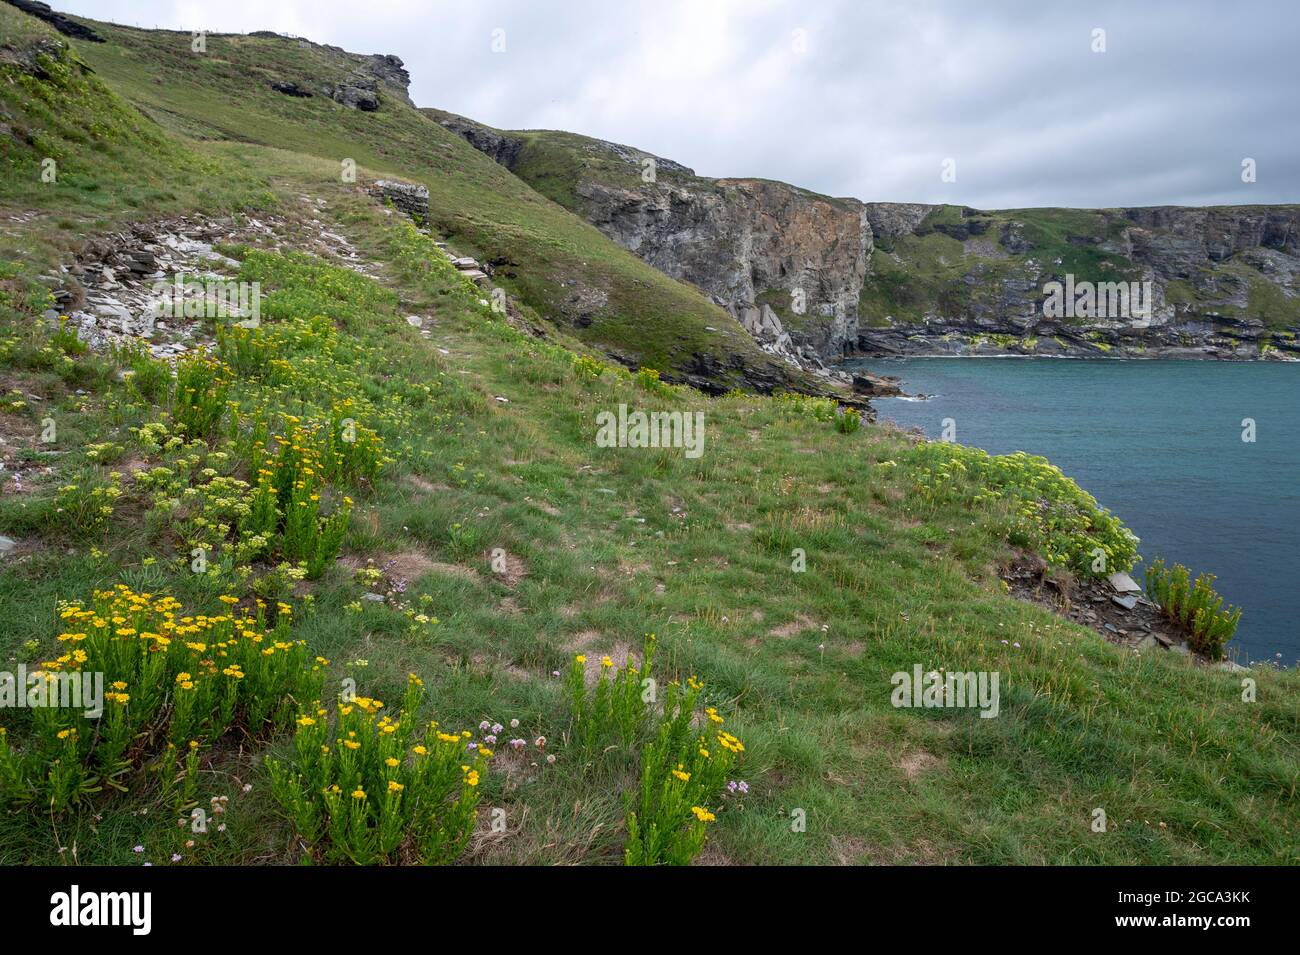 Swathes of rock samphire, Crithmum maritimum, mixed with golden samphire, Limbarda crithmoides, growing naturally on cliffs in North Cornwall. Stock Photo